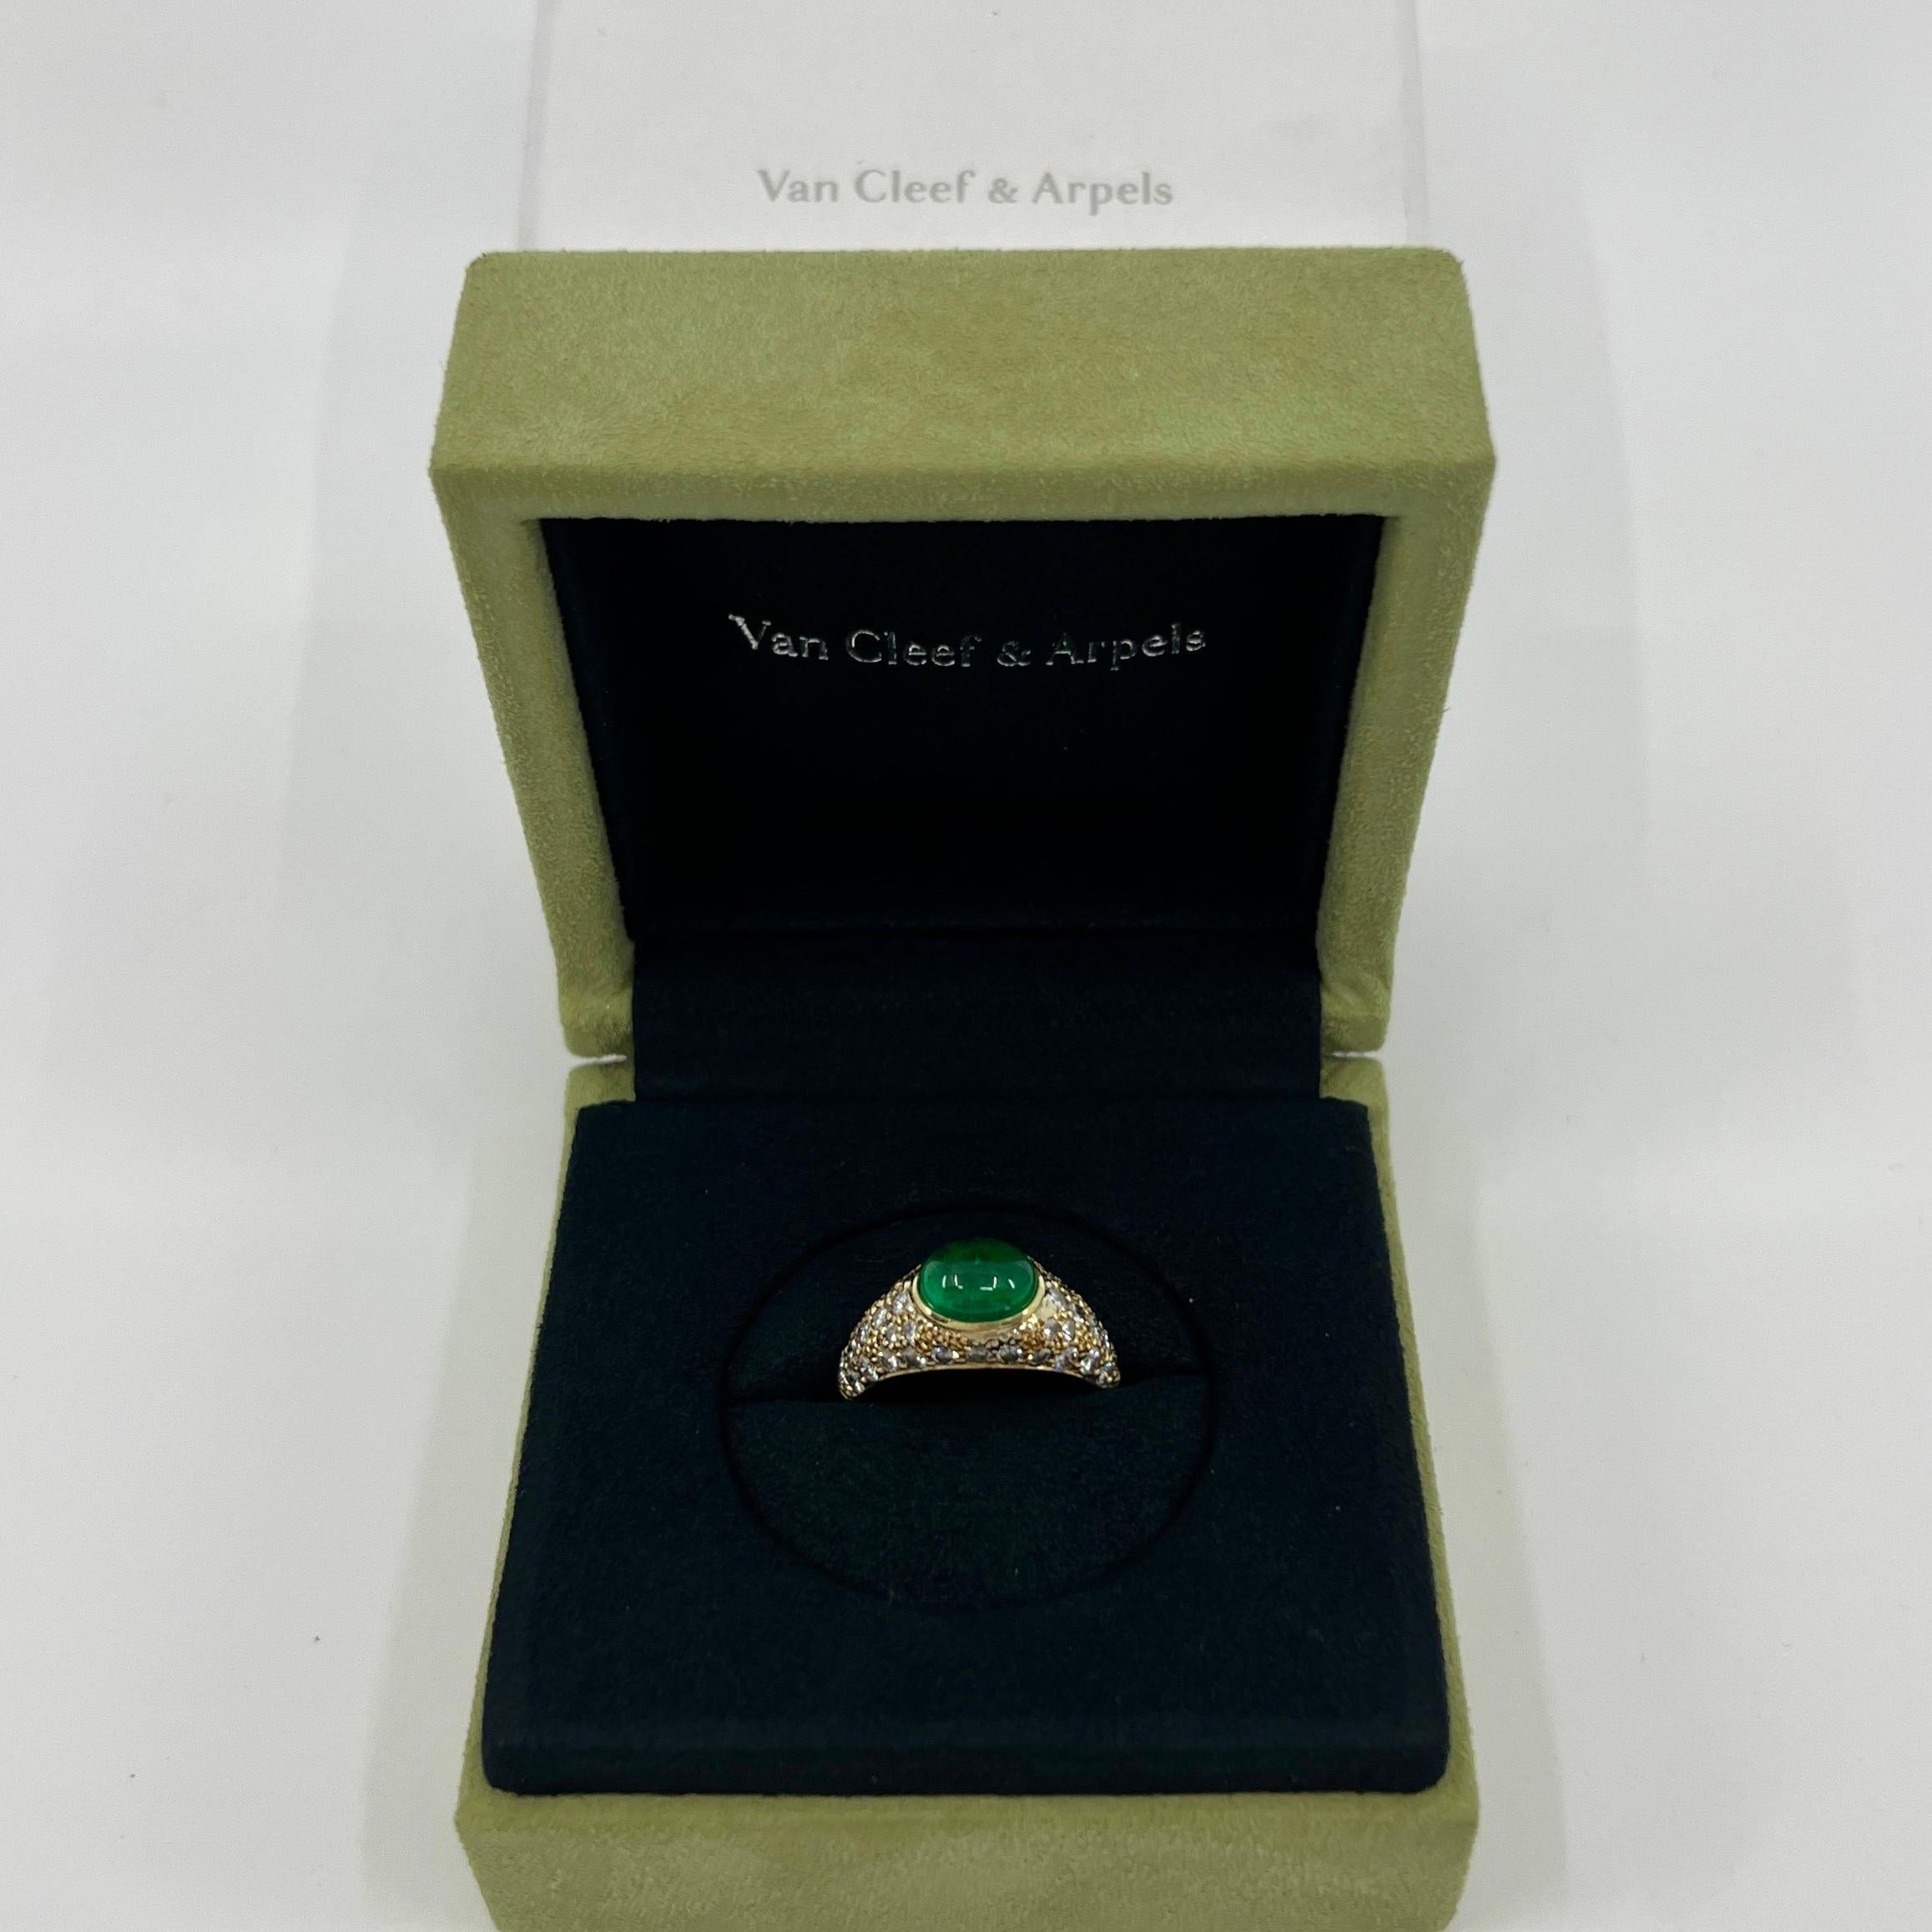 Rare Vintage Van Cleef & Arpels Oval Cabochon Emerald And Diamond 18k Yellow Gold Cocktail Dome Ring.

A stunning and rare vintage VCA New York ring with a classic design typical of Van Cleef & Arpels, set with a beautiful natural oval cabochon